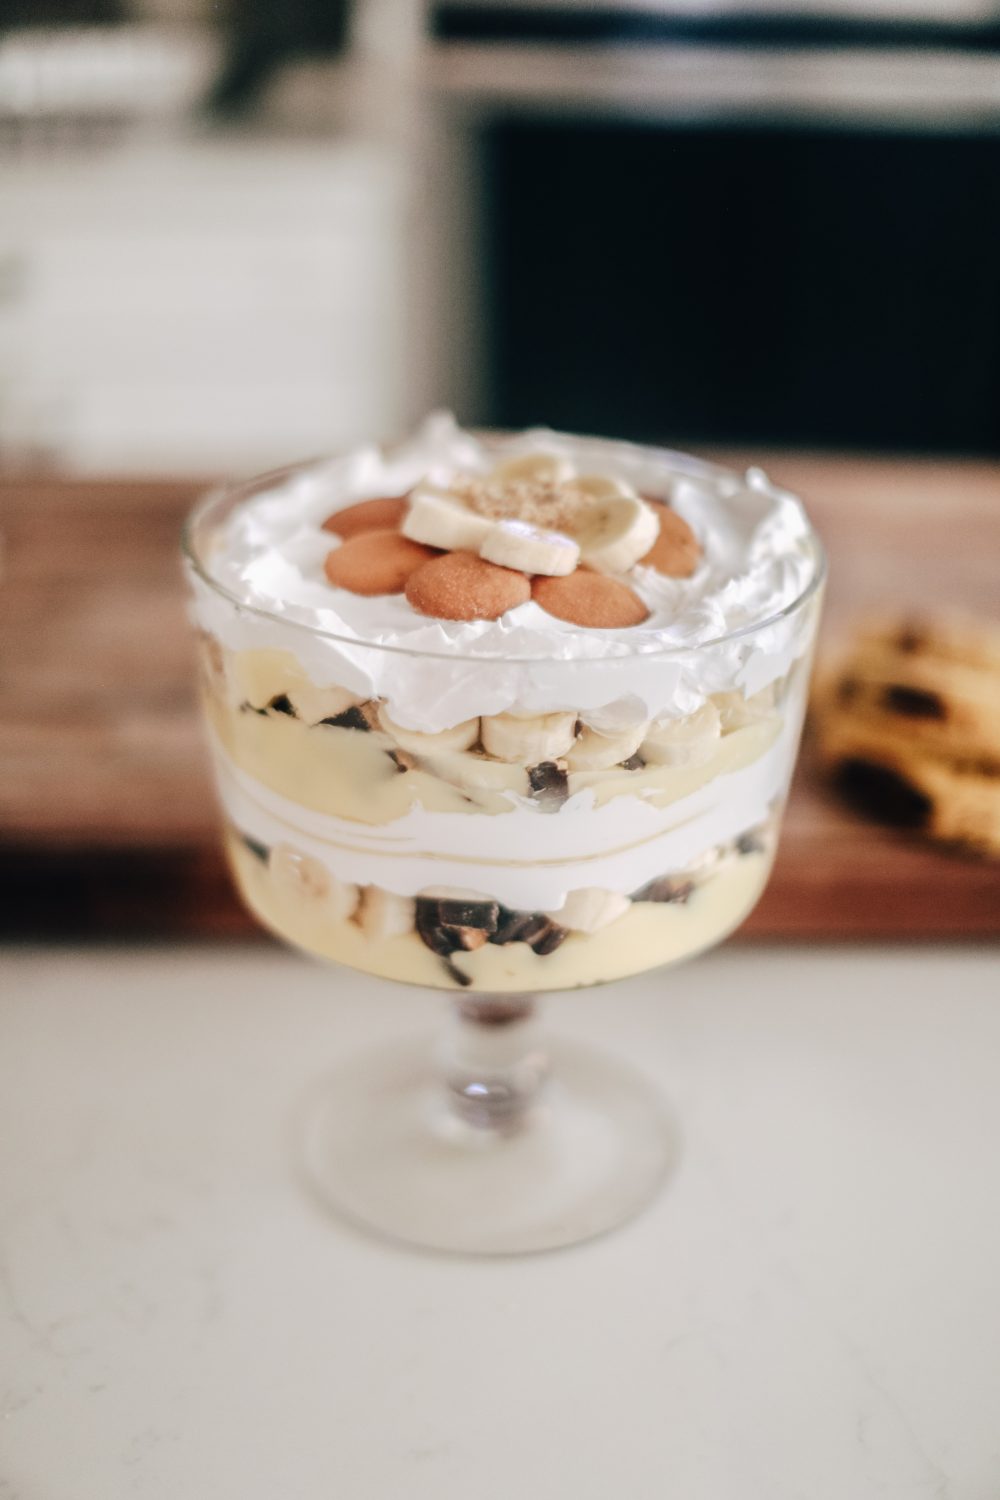 How to Make the Best Southern Banana Pudding